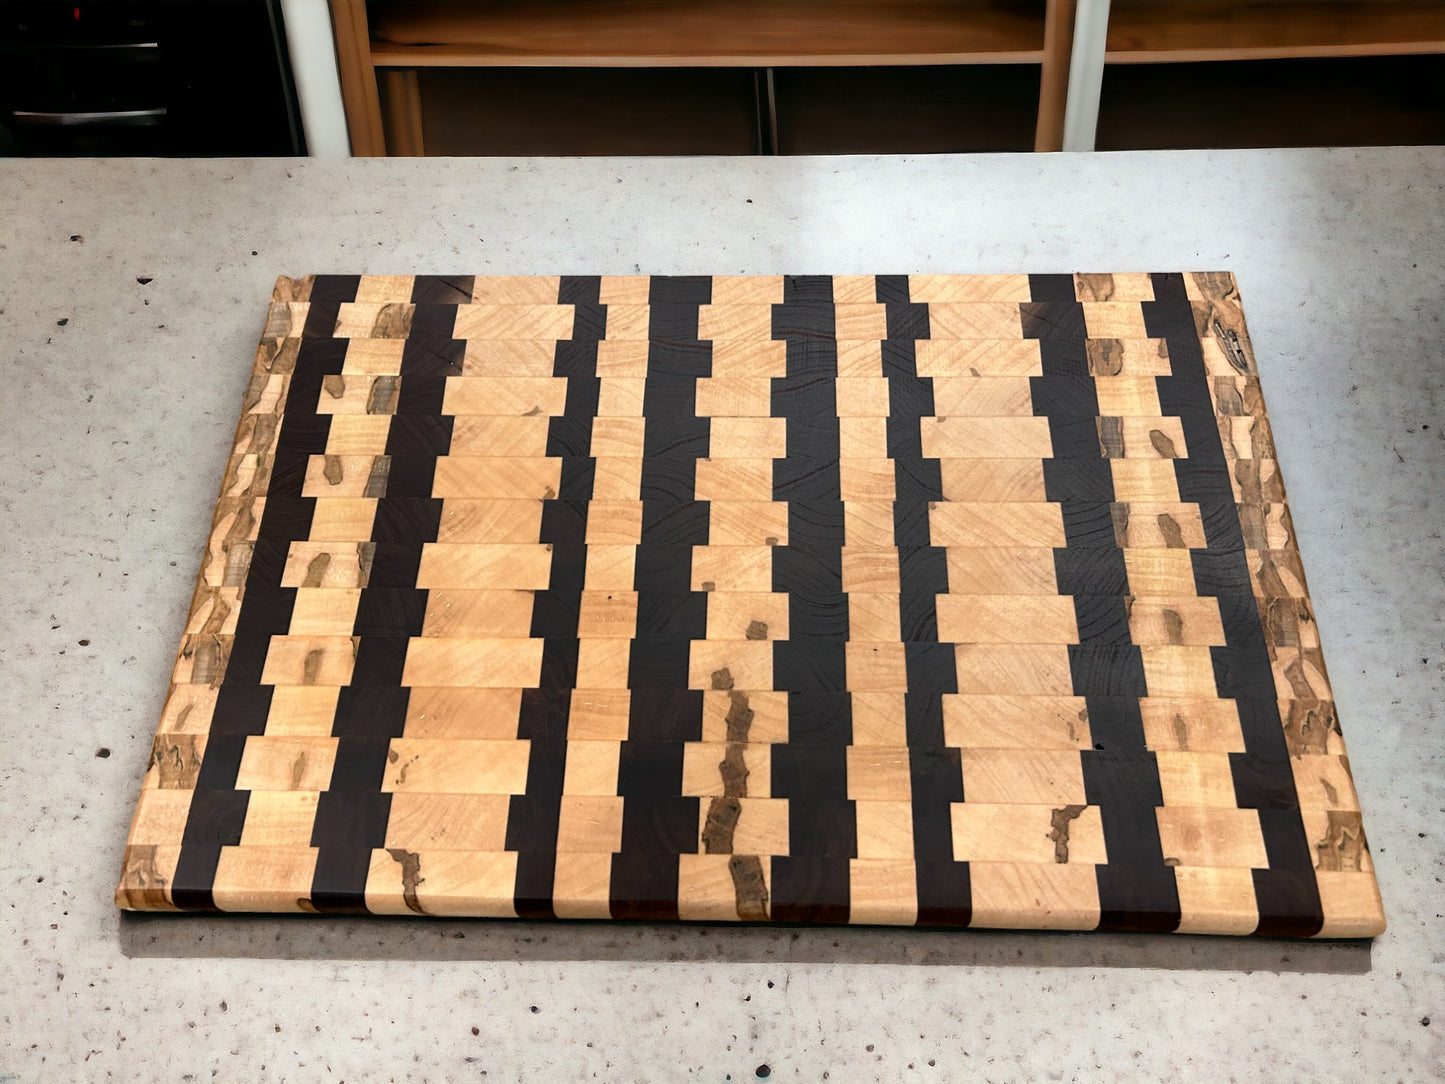 Cutting board made with Black Walnut and Ambrosia Maple